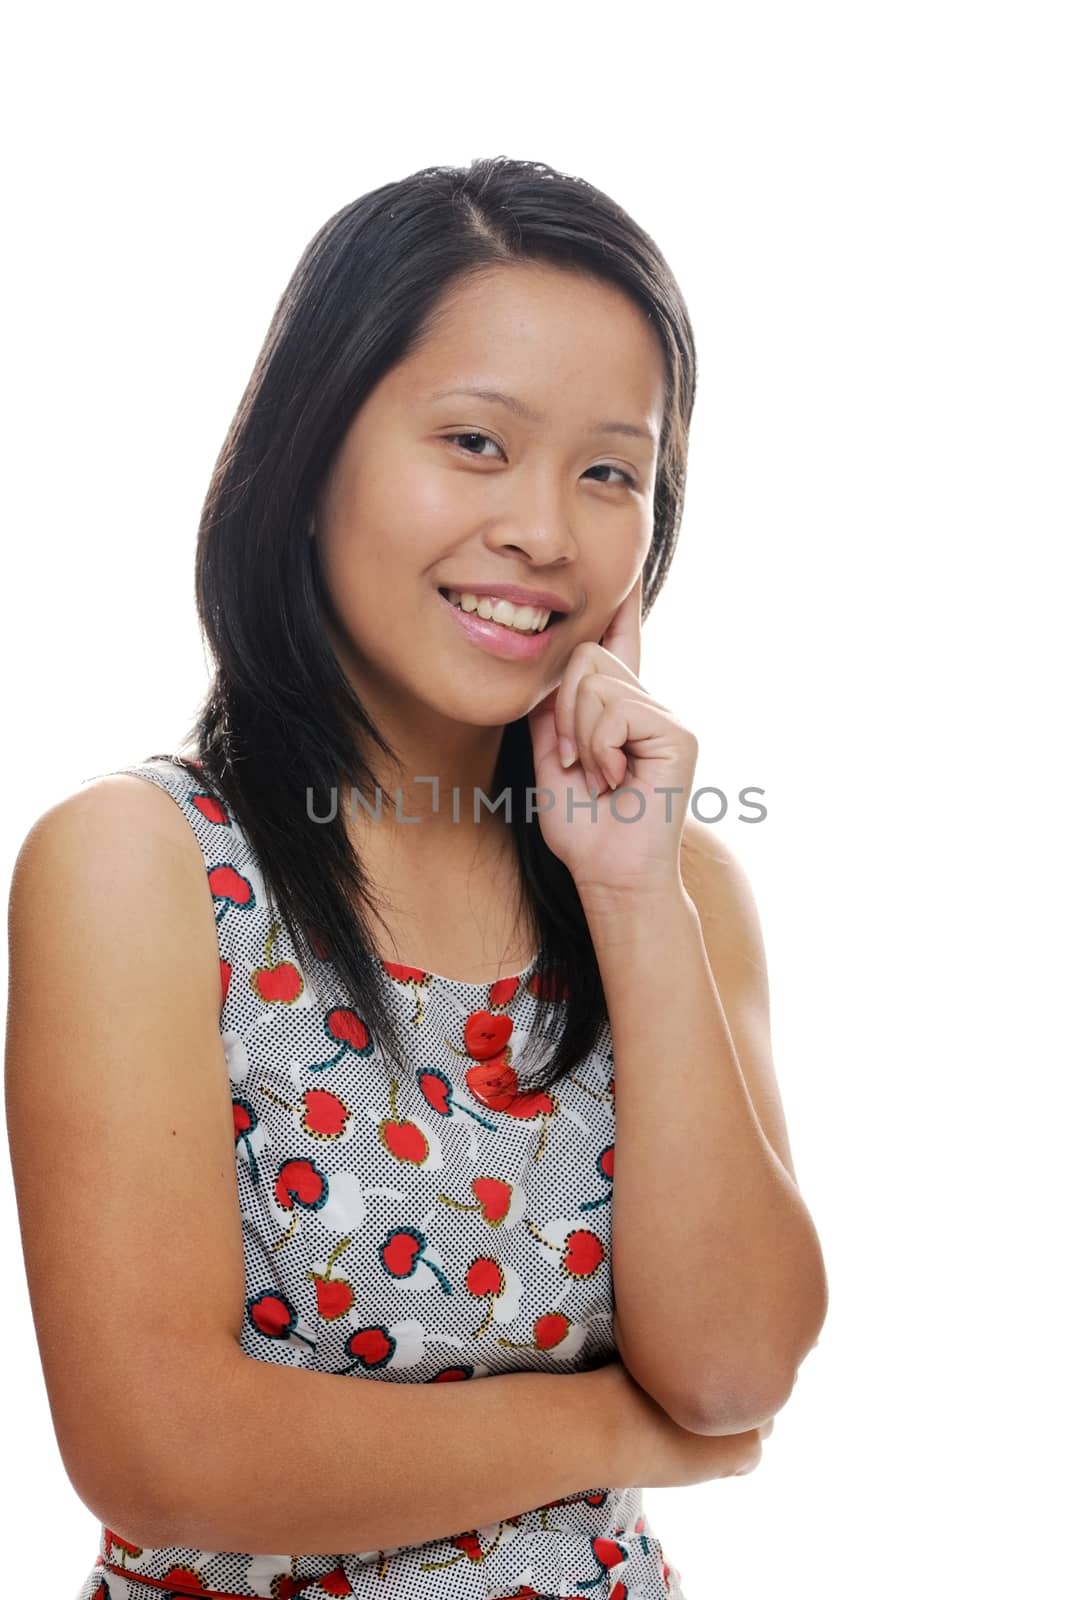 Asian girl looking cheerful and happy